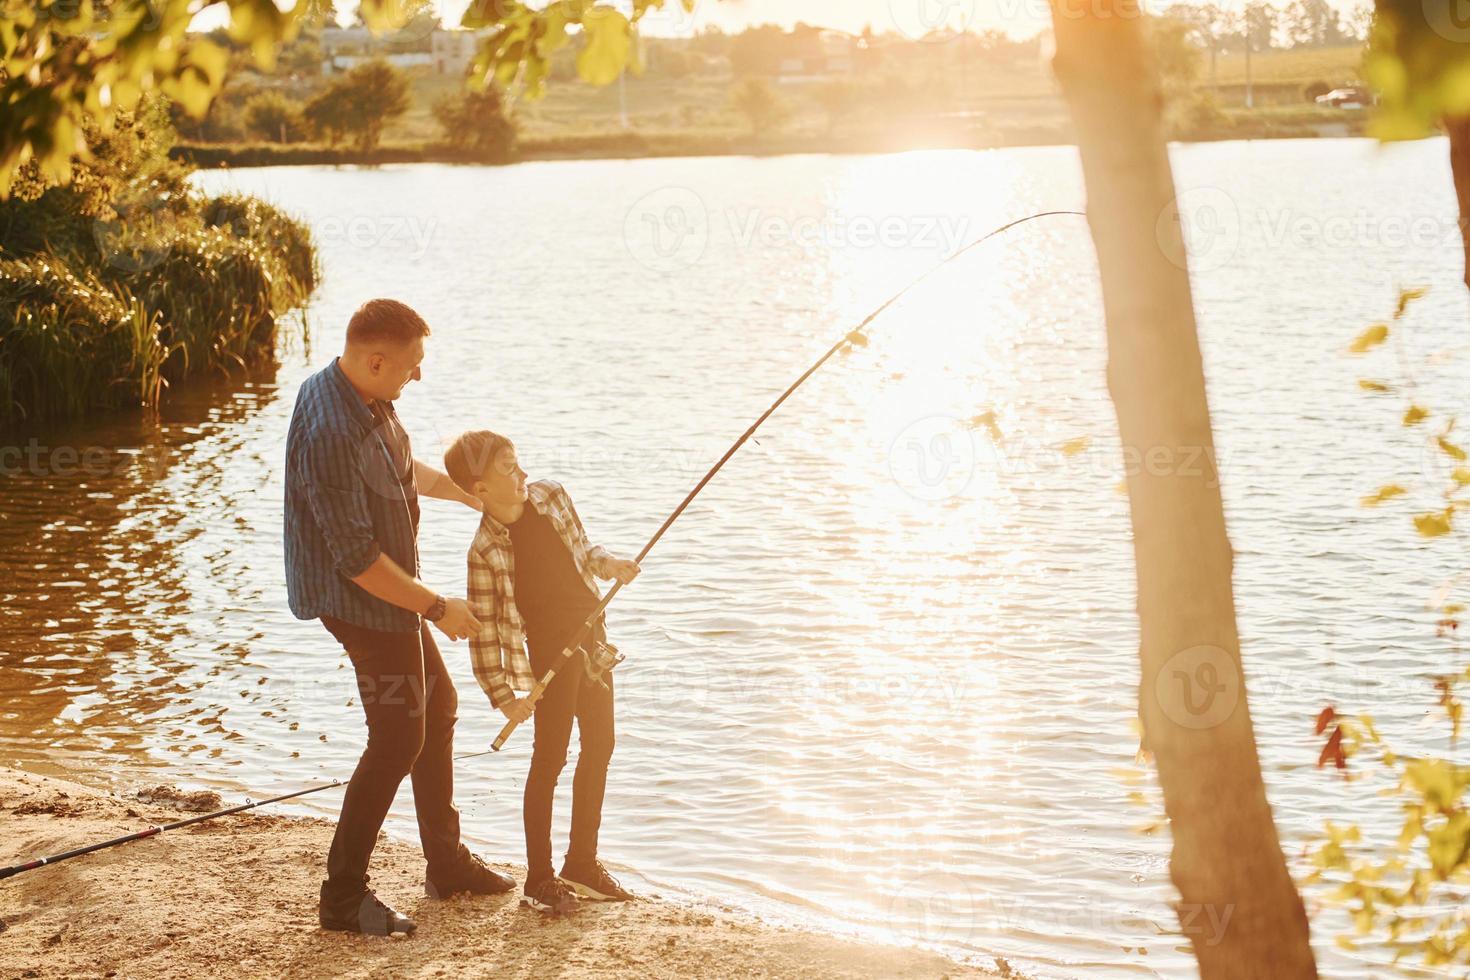 With catch. Father and son on fishing together outdoors at summertime photo